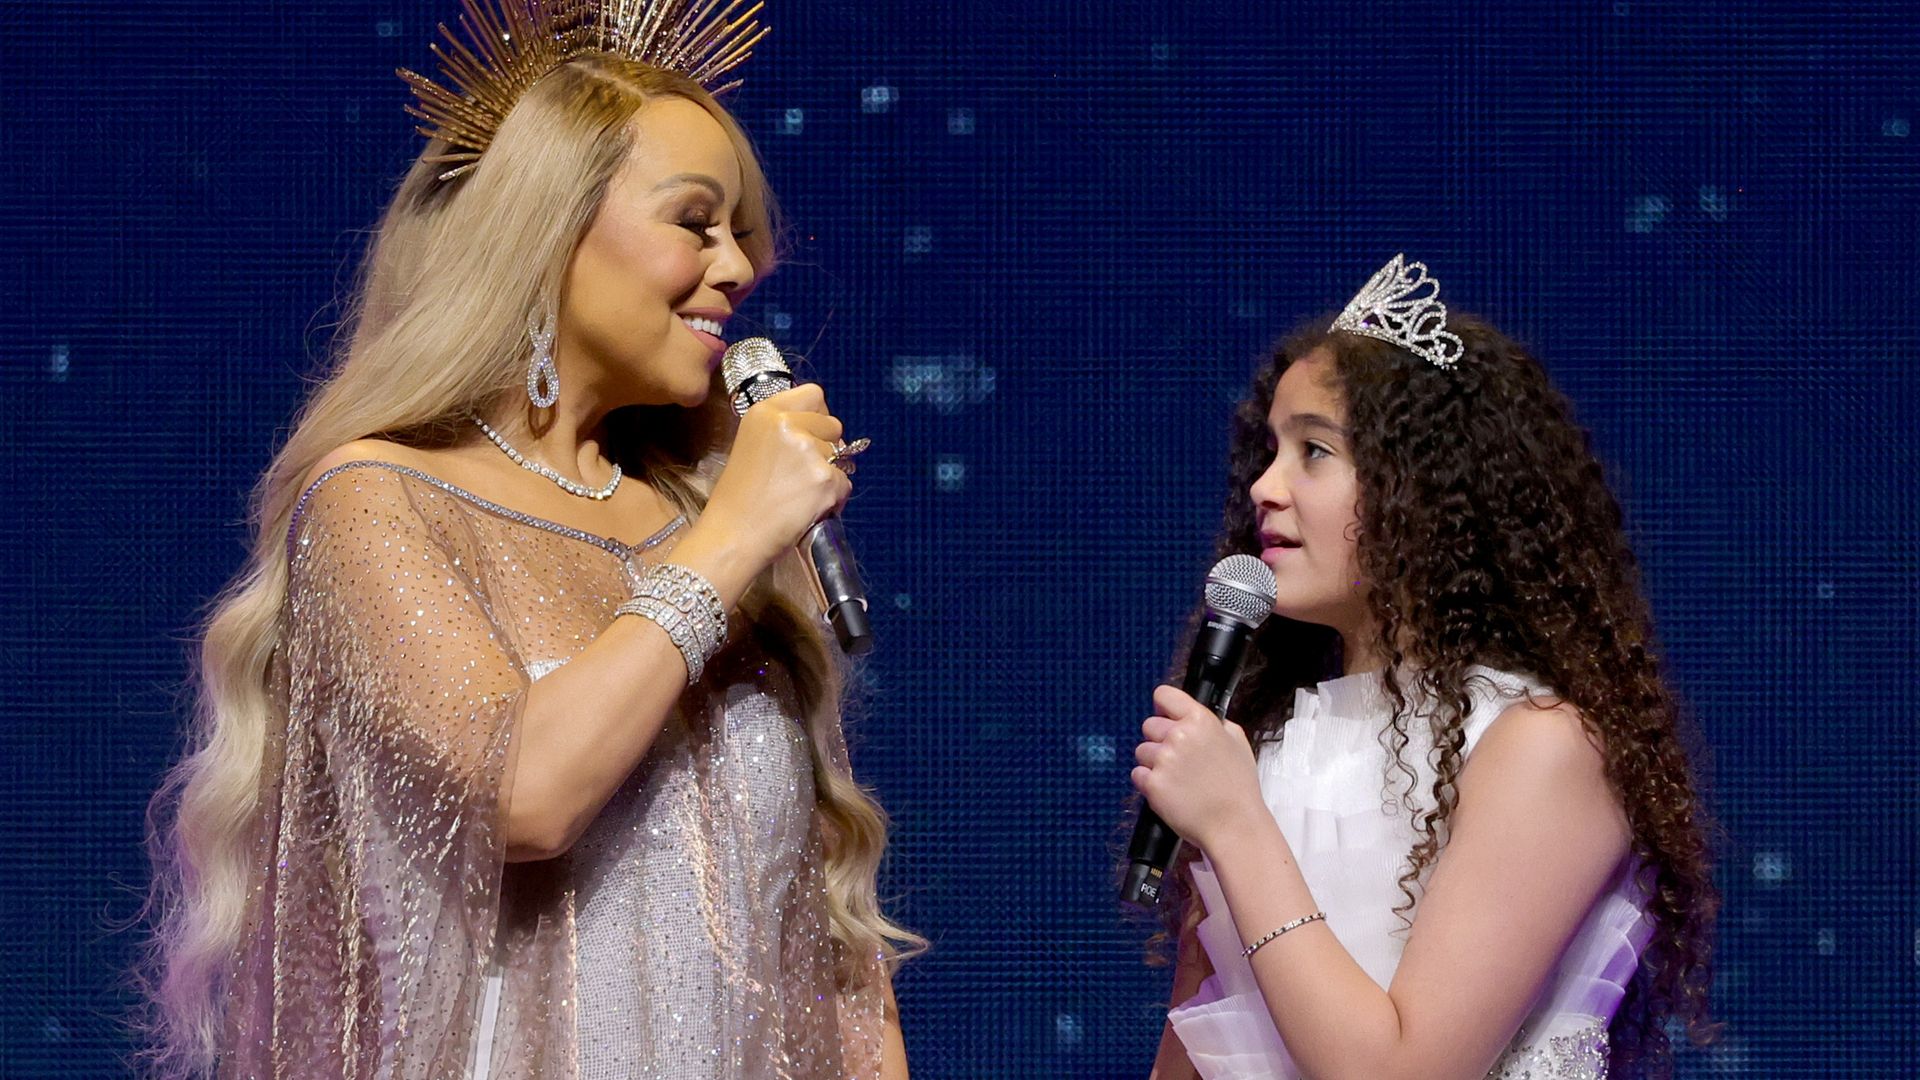 Mariah Carey unveils daughter Monroe's first major hair transformation ahead of milestone 13th birthday: 'Mommy gives in'